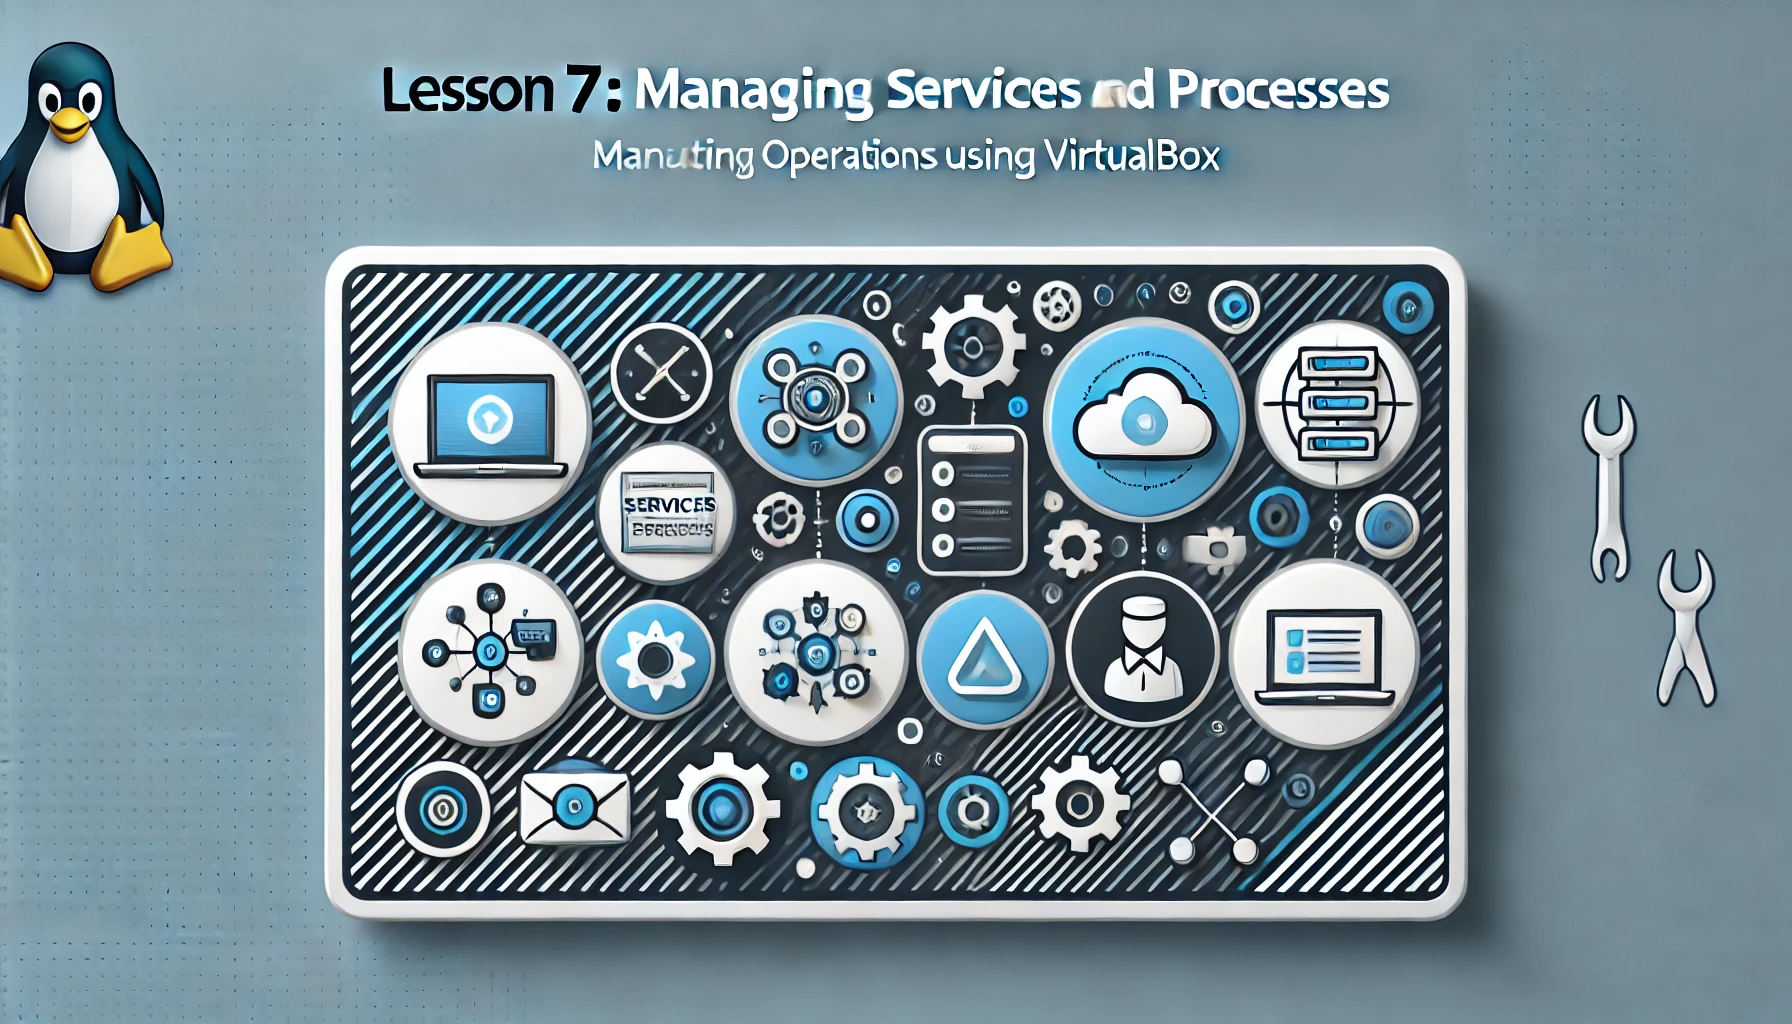 Lesson 7 - Managing Services and Processes